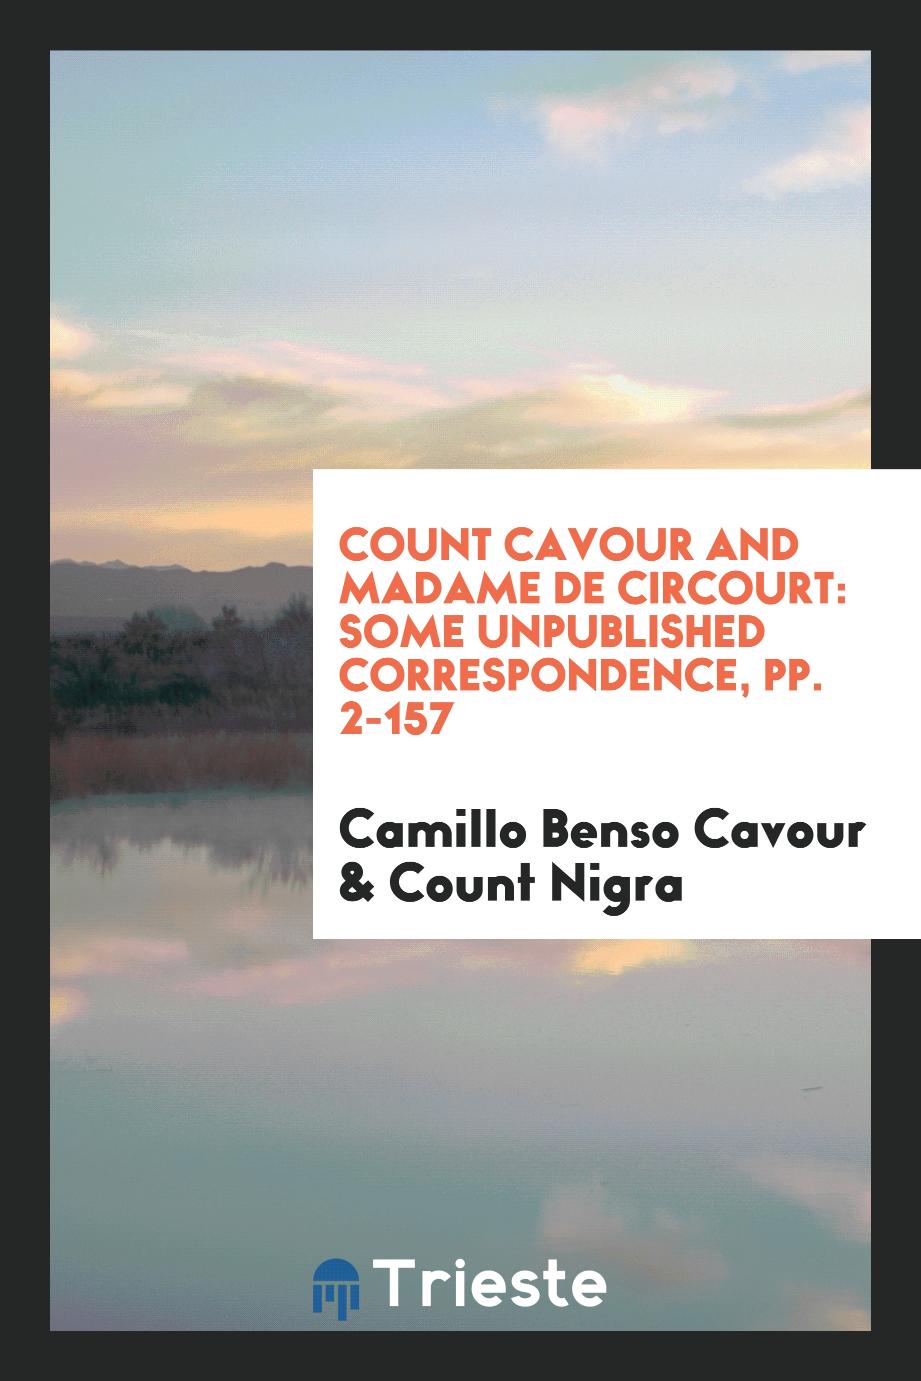 Count Cavour and Madame de Circourt: Some Unpublished Correspondence, pp. 2-157